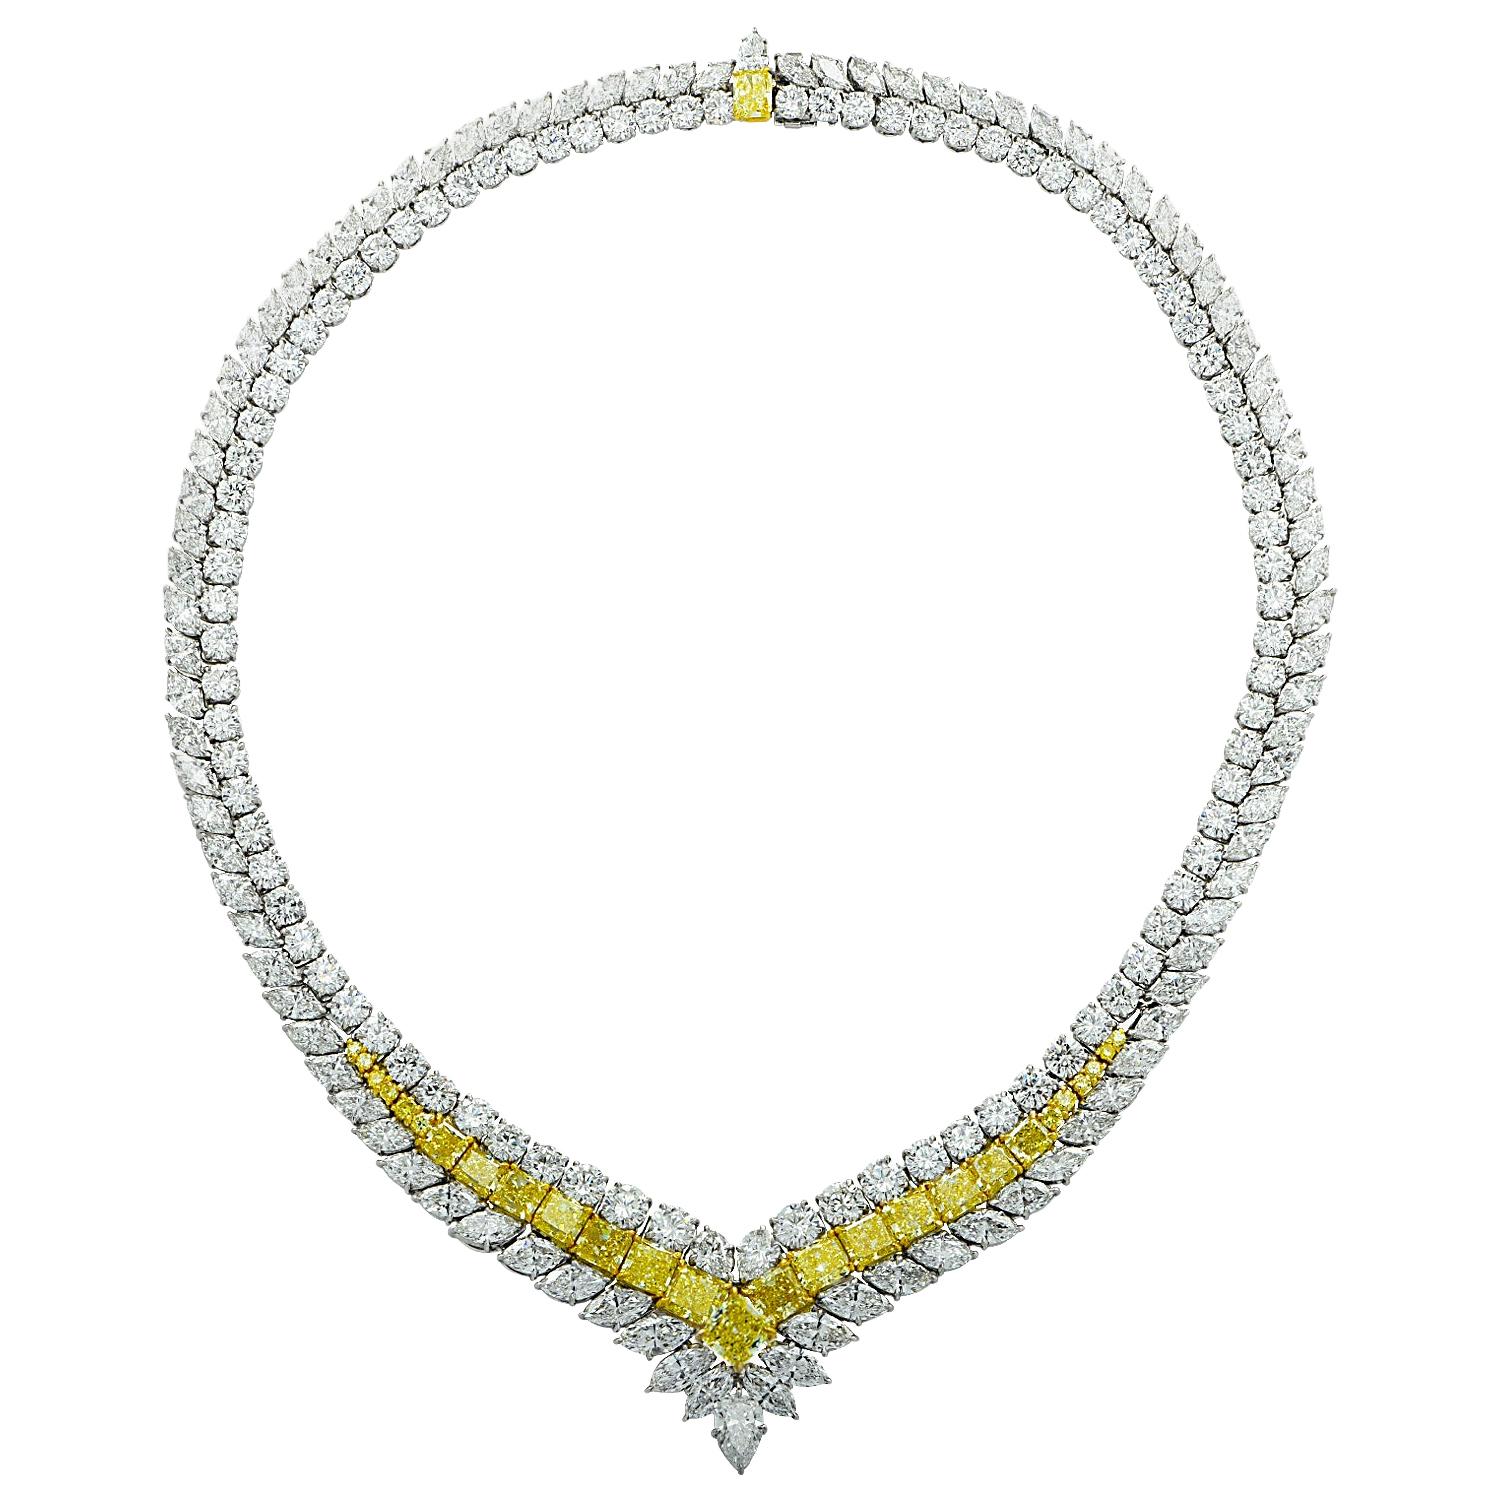 80.81 Carat GIA Certified Fancy Intense Yellow and White Diamond Necklace For Sale